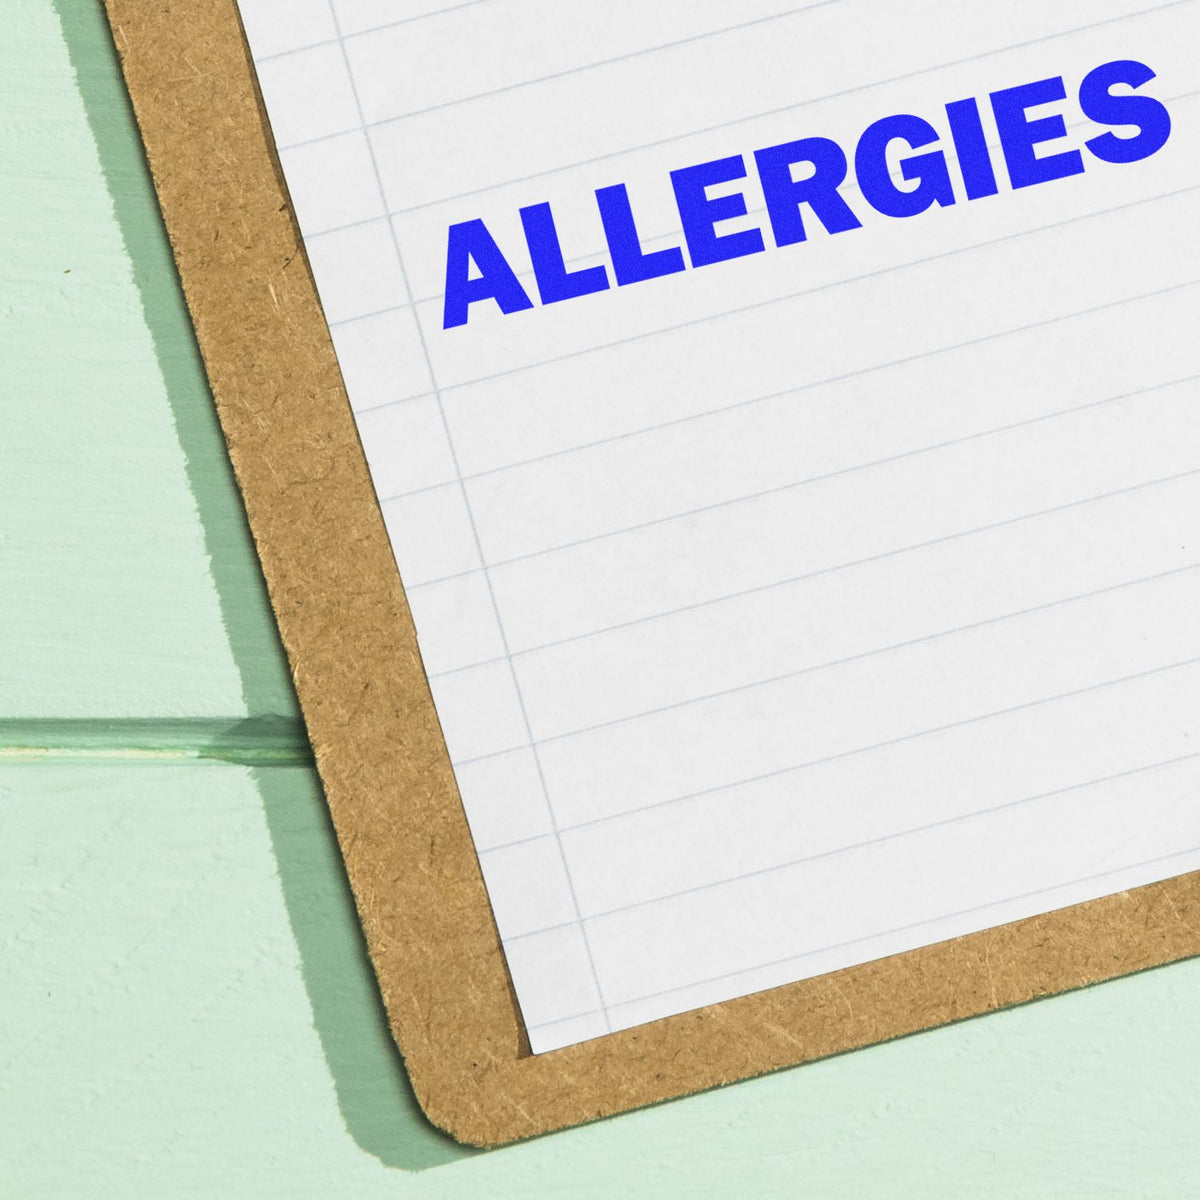 Allergies Rubber Stamp In Use Photo